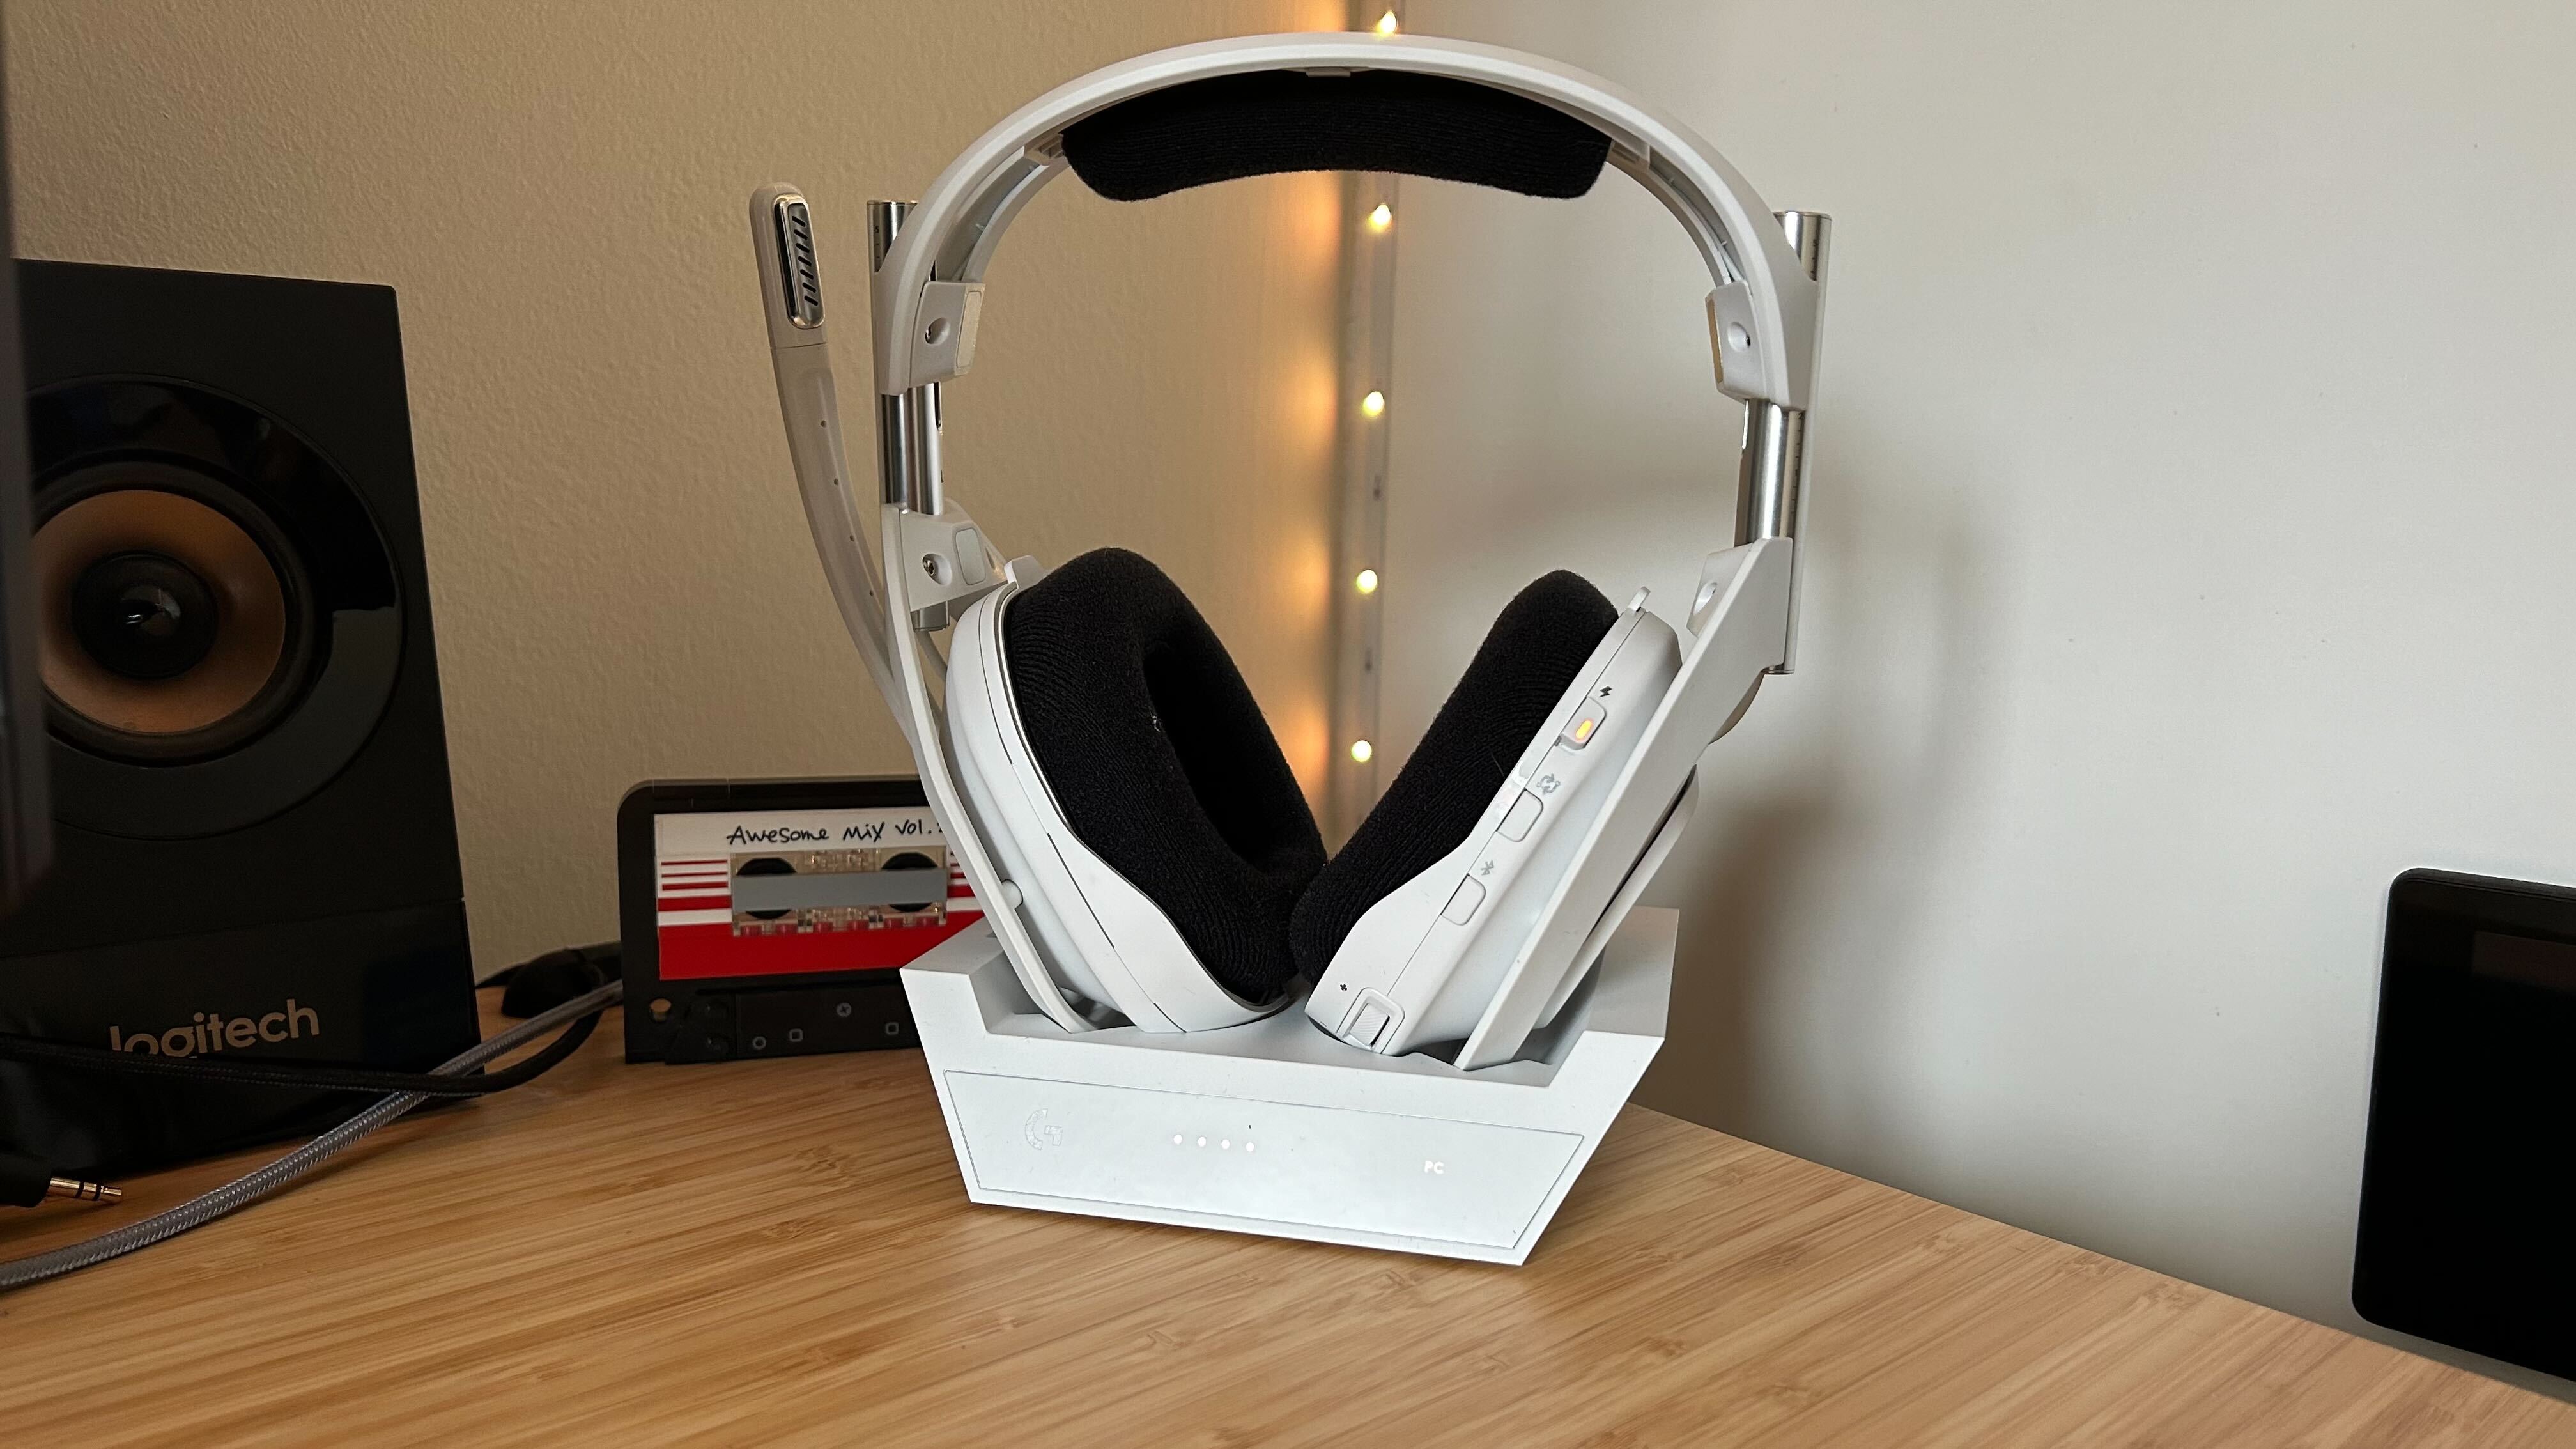 Astro A50 X headset in dock on a wooden table